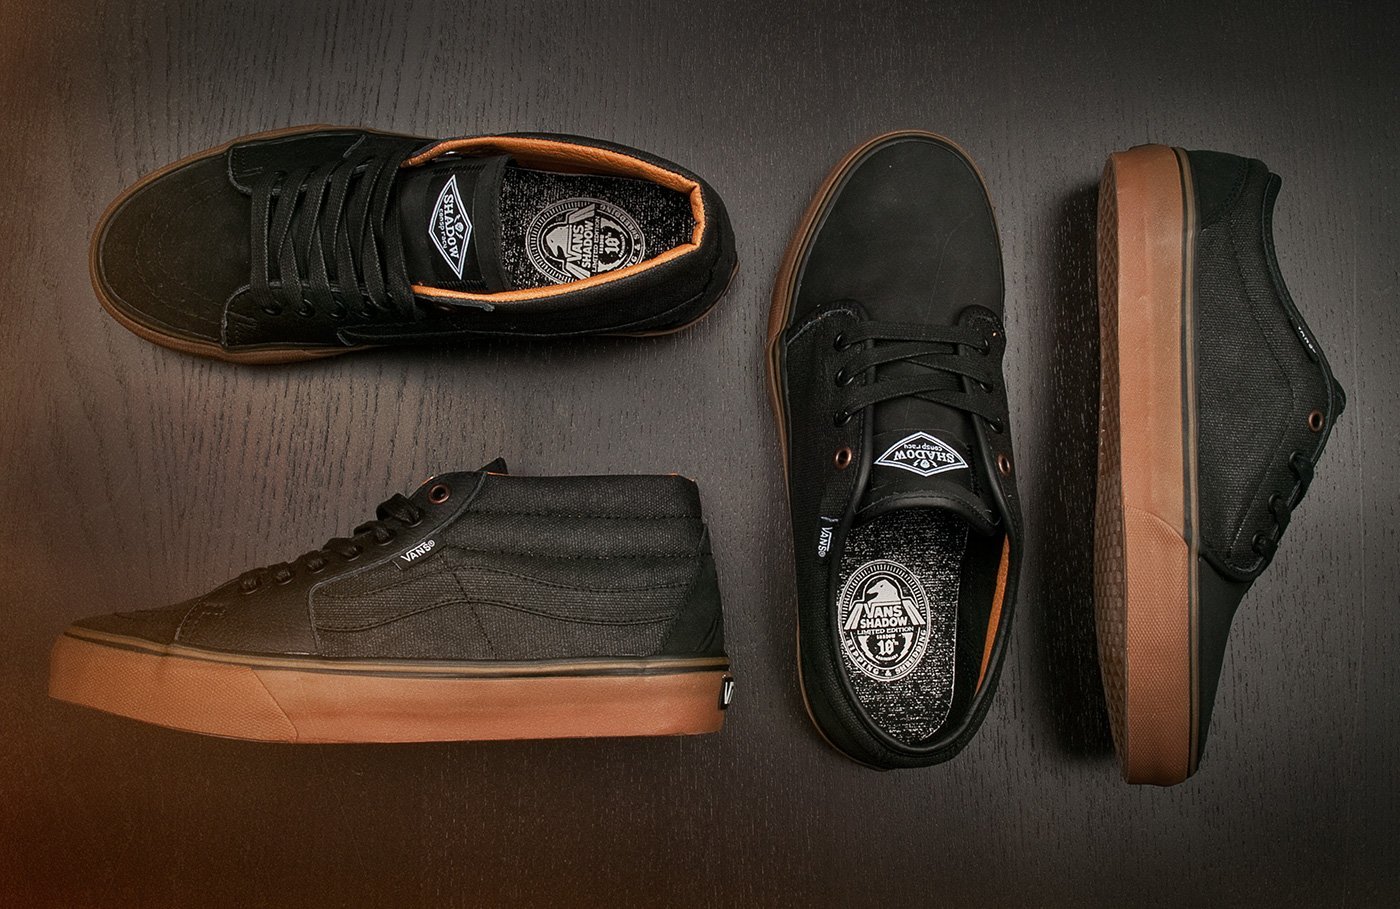 vans shadow conspiracy shoes